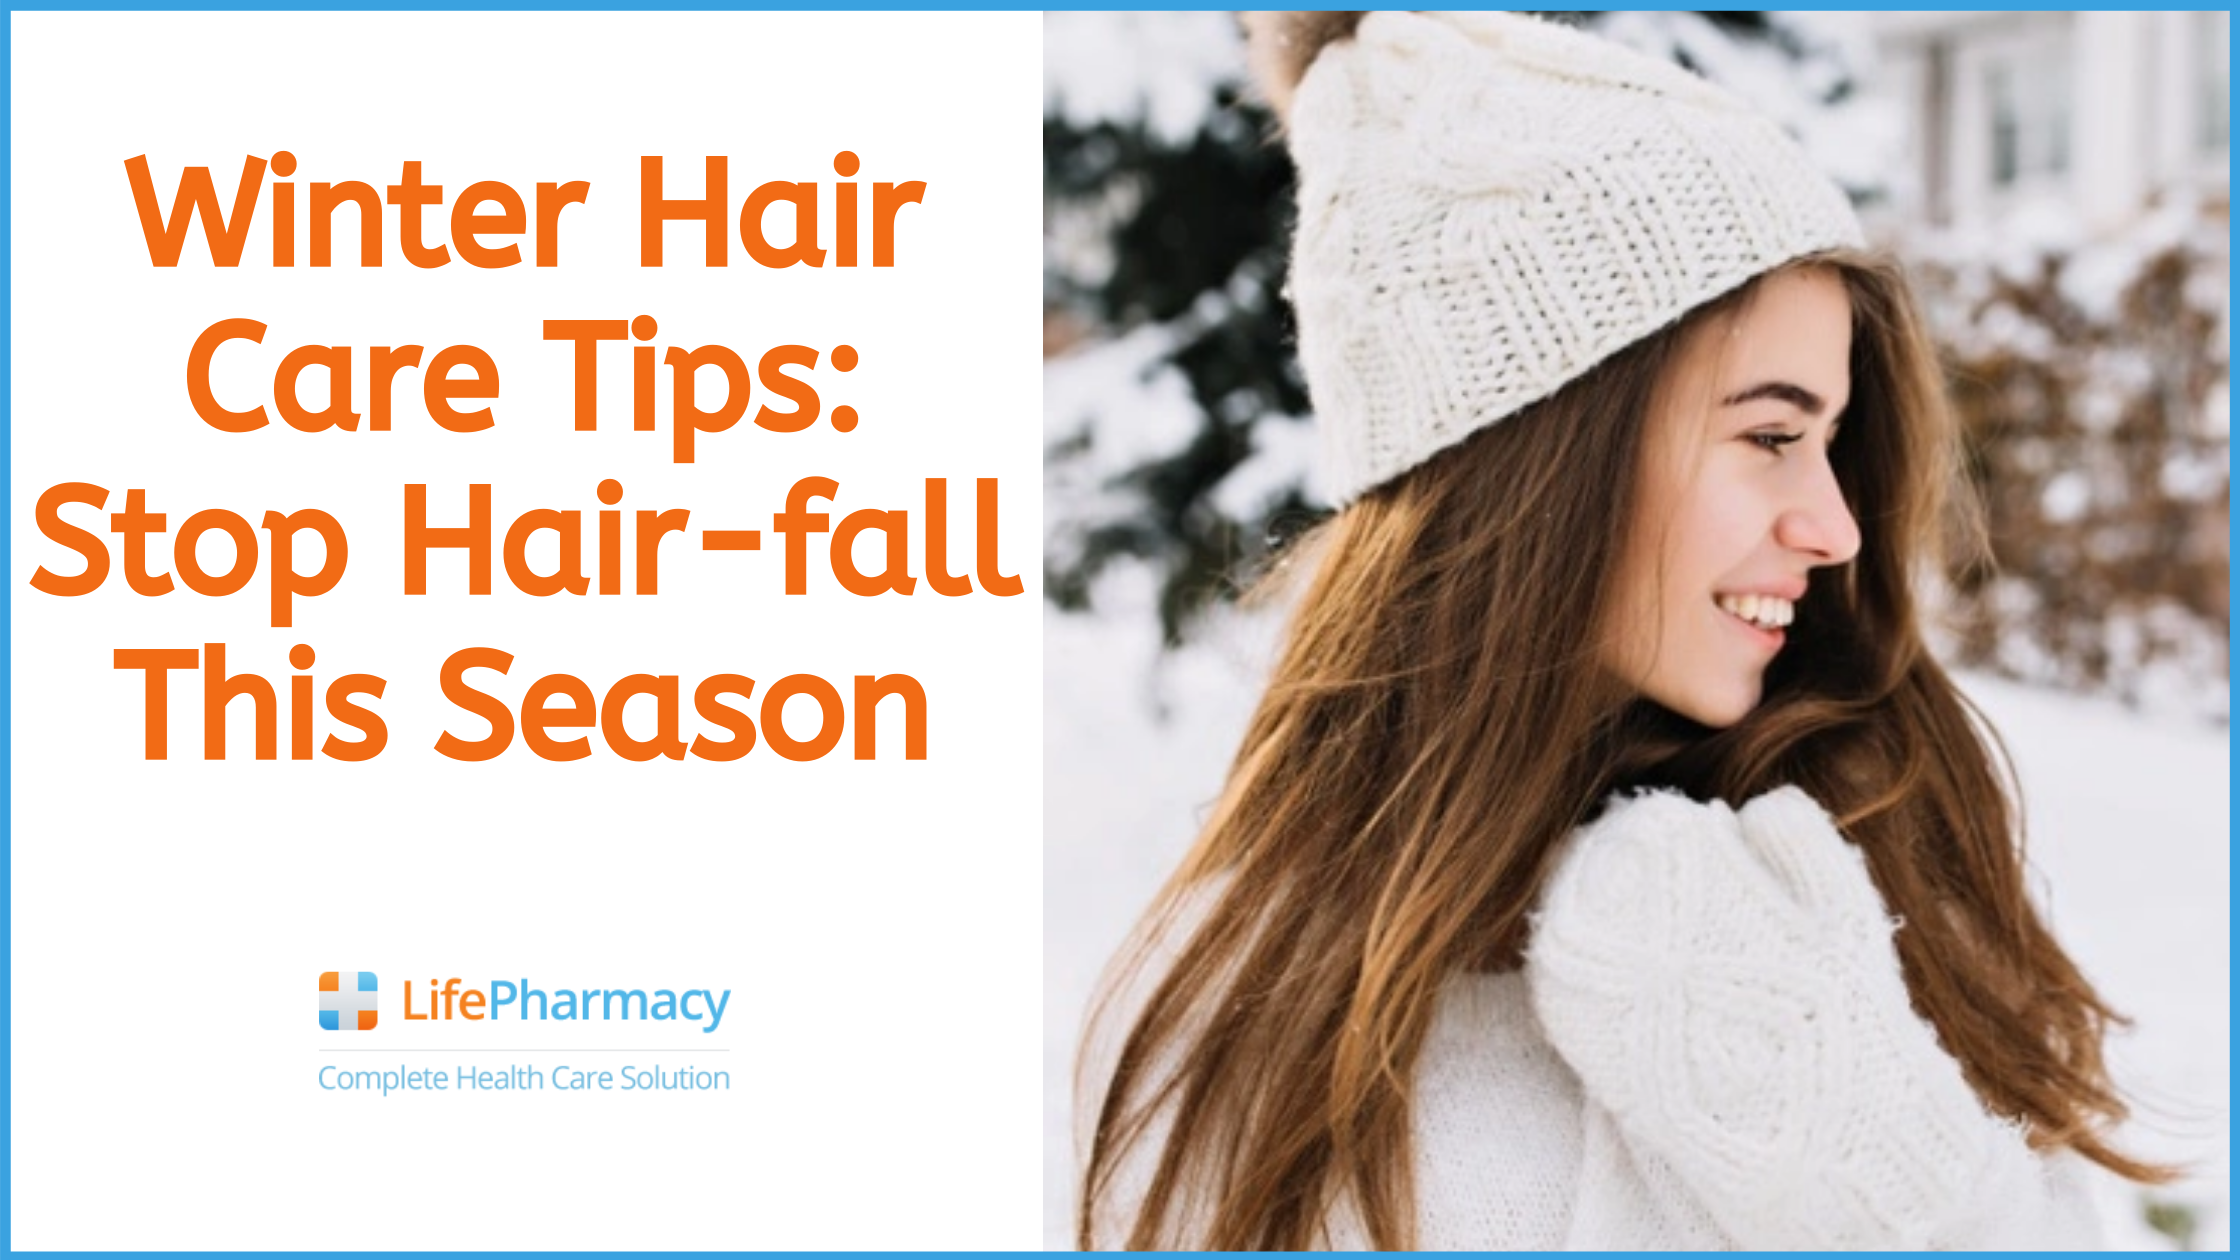 Winter Hair Care: Tips for Keeping Your Blonde Hair Healthy and Vibrant - wide 4